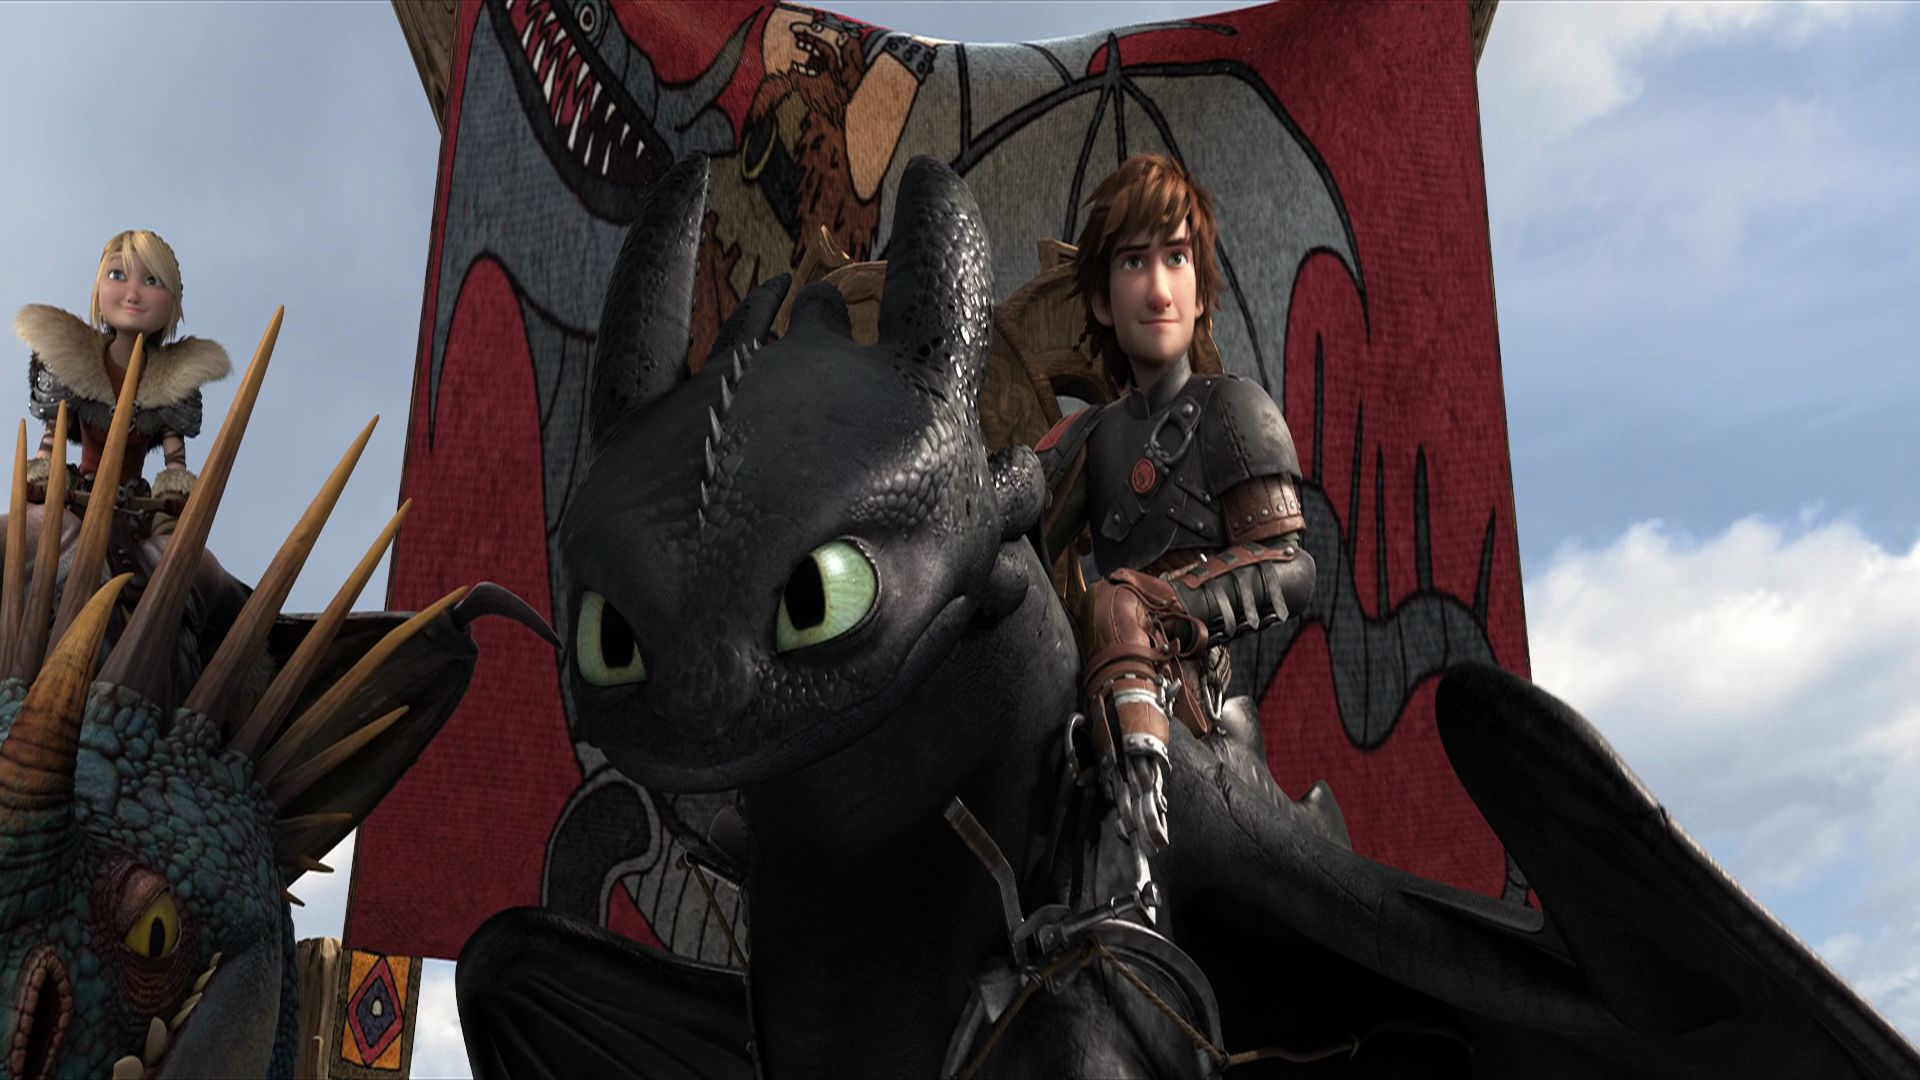 movie, how to train your dragon 2, astrid (how to train your dragon), hiccup (how to train your dragon), toothless (how to train your dragon), how to train your dragon